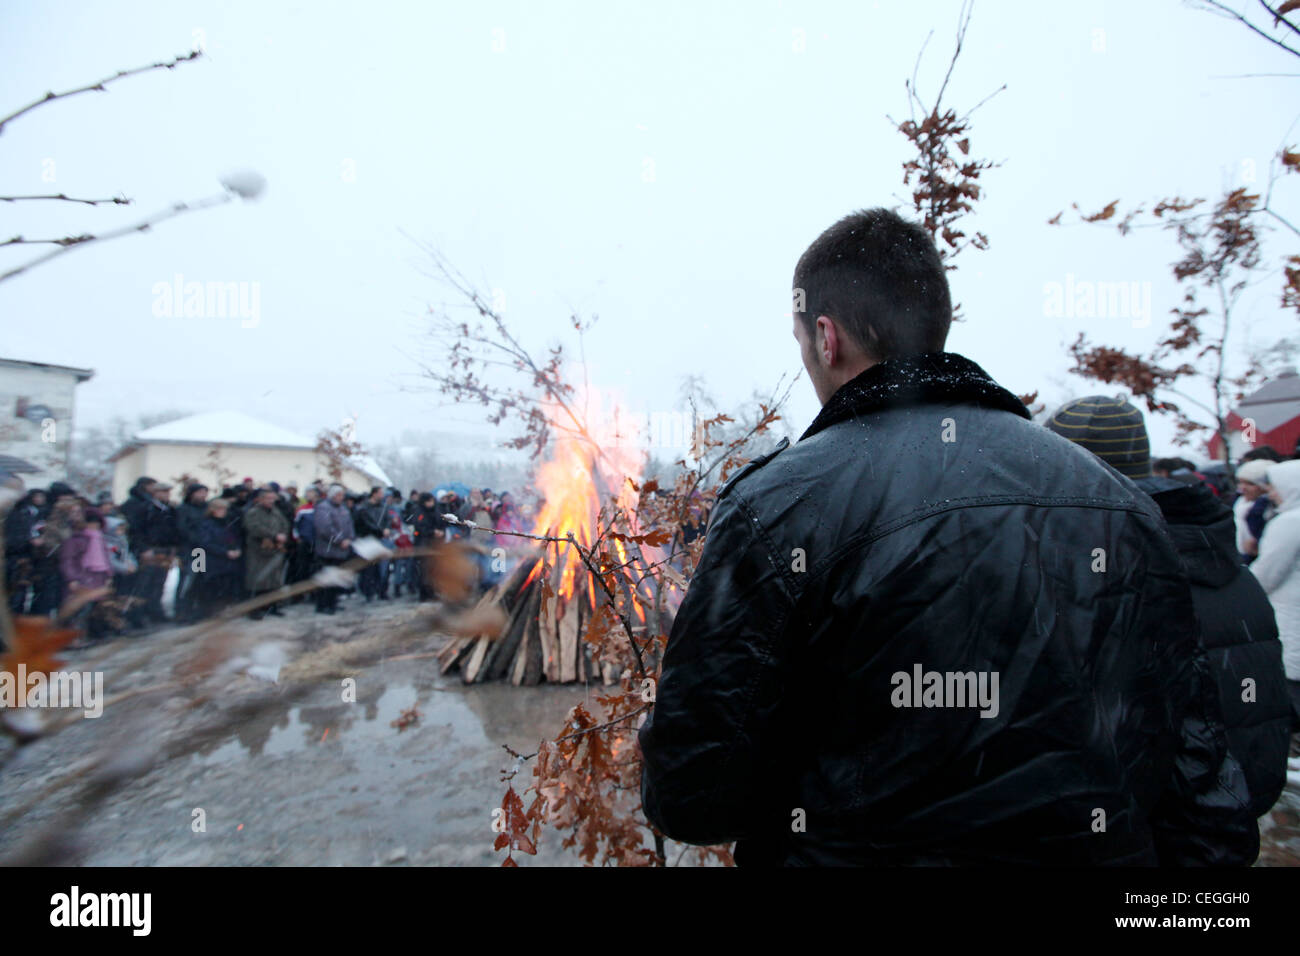 Man waiting to place wood on the public campfire during orthodox christmas celebration in Mojkovac, Montenegro, Balkans Stock Photo